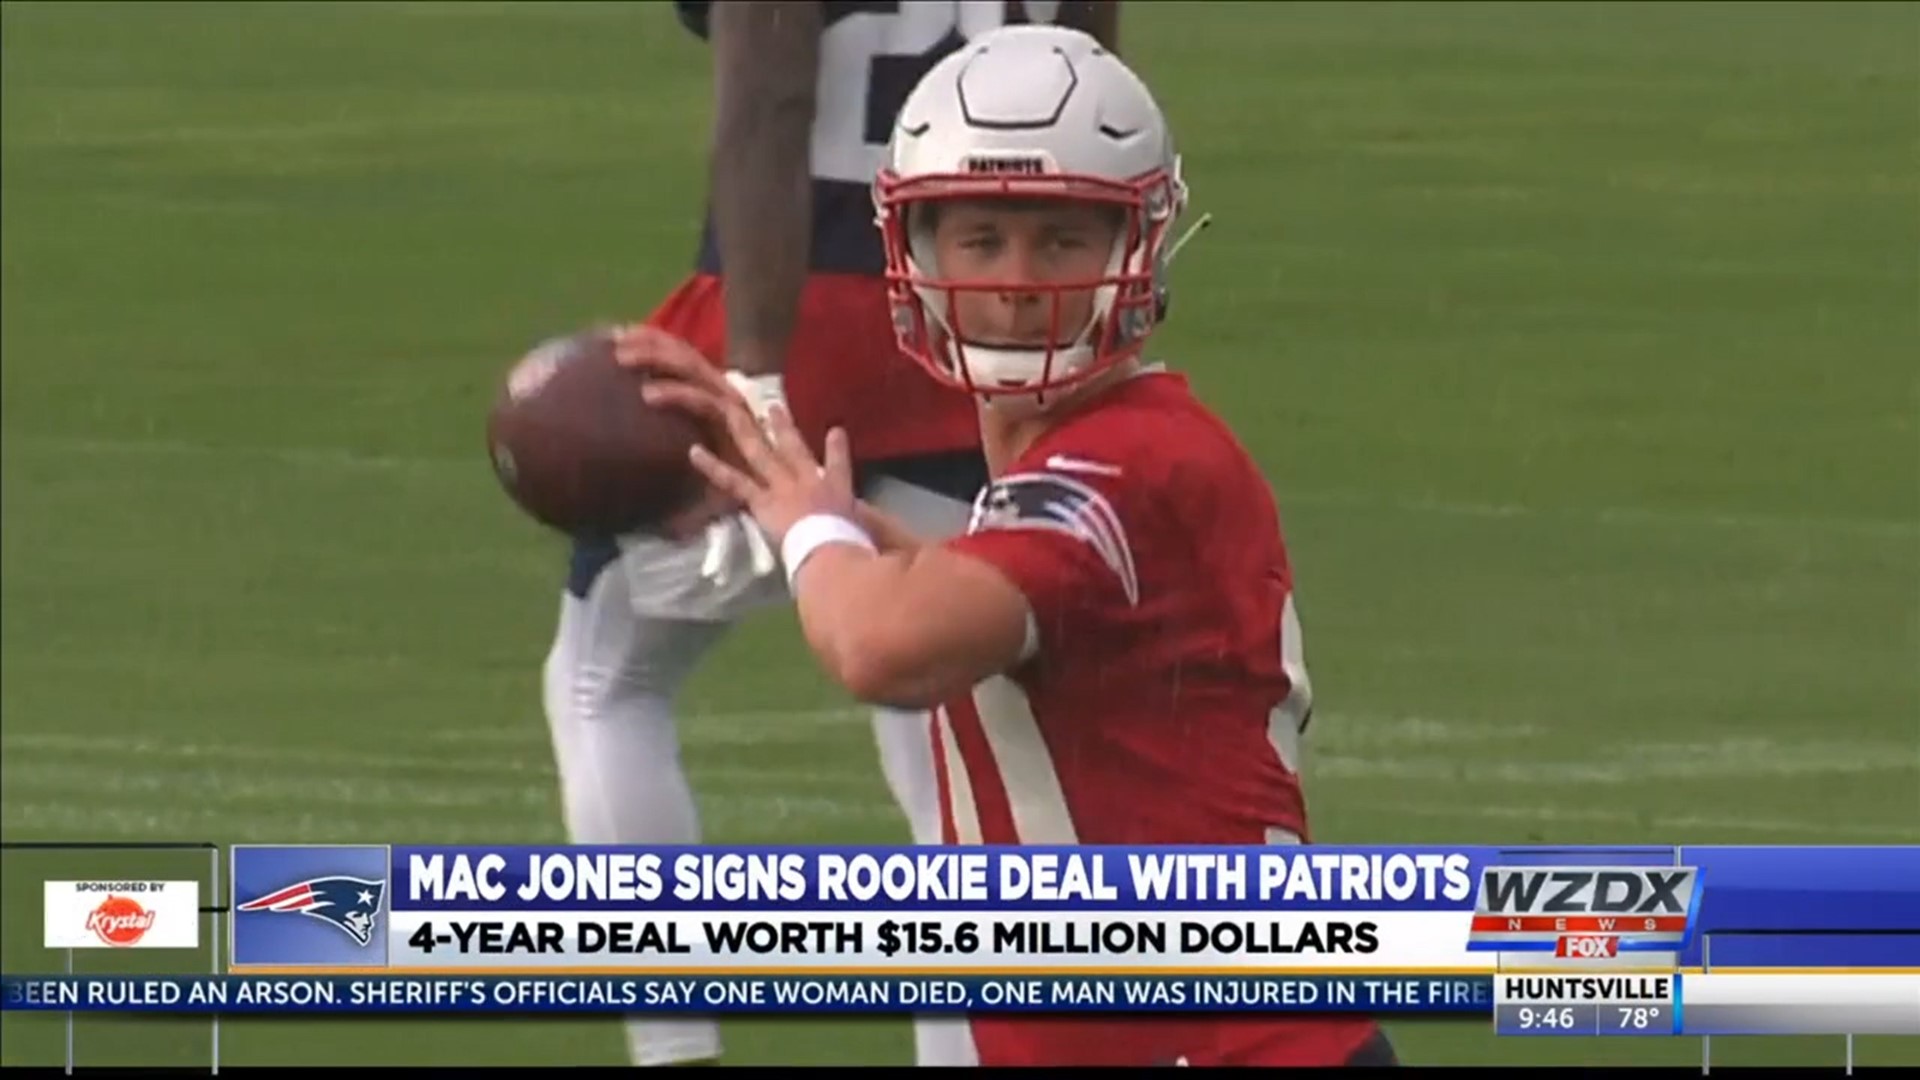 Mac Jones signed his four-year rookie contract with the Patriots on Tuesday. As the 15th overall pick, Jones’ slotted deal is worth a guaranteed $15.6 million dollar